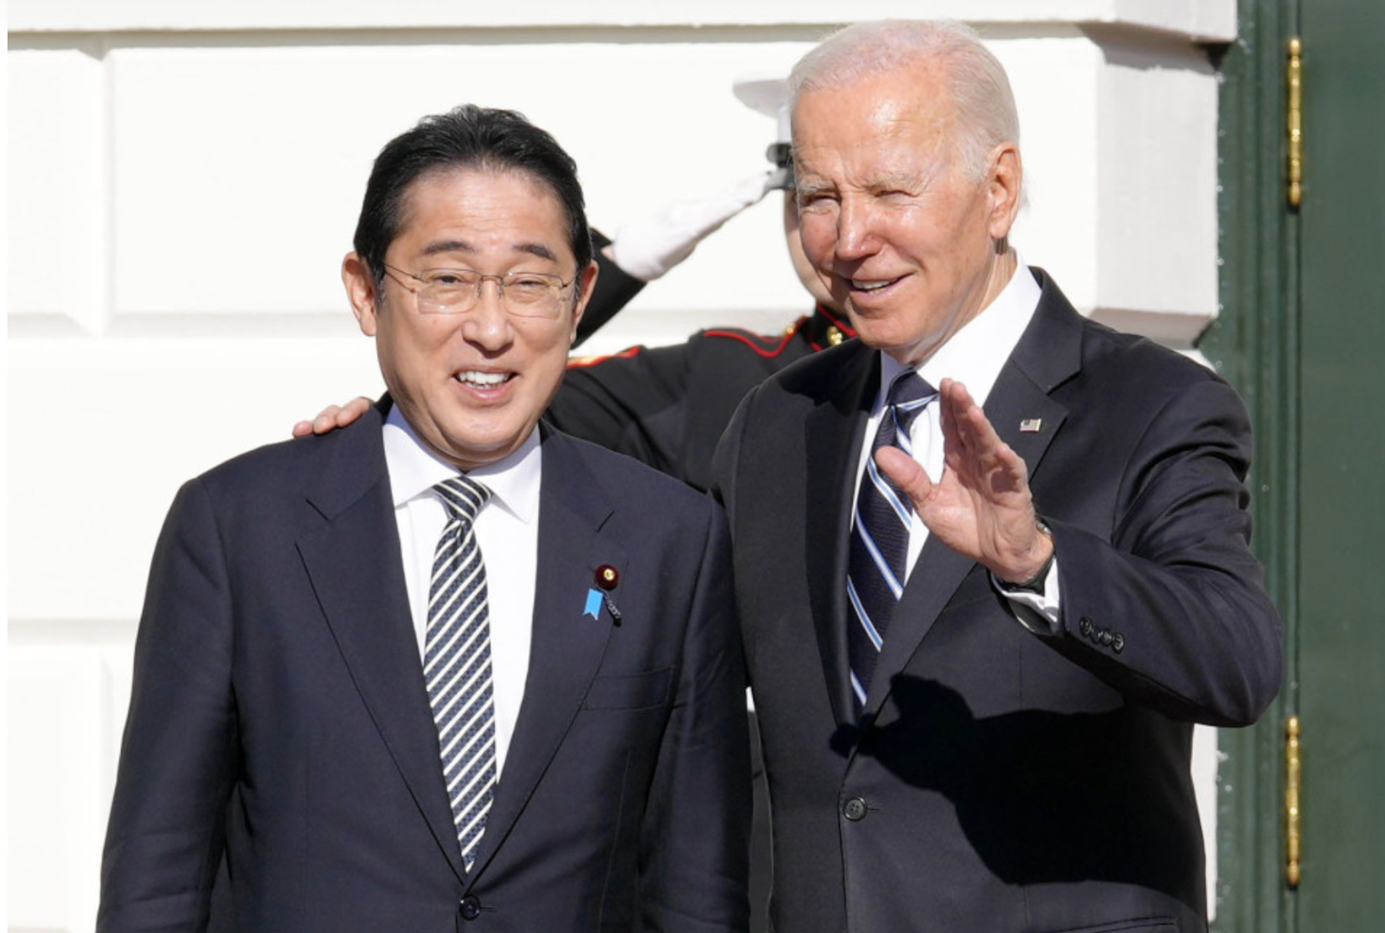 Biden says it would be 'too early' to announce a presidential run in ...